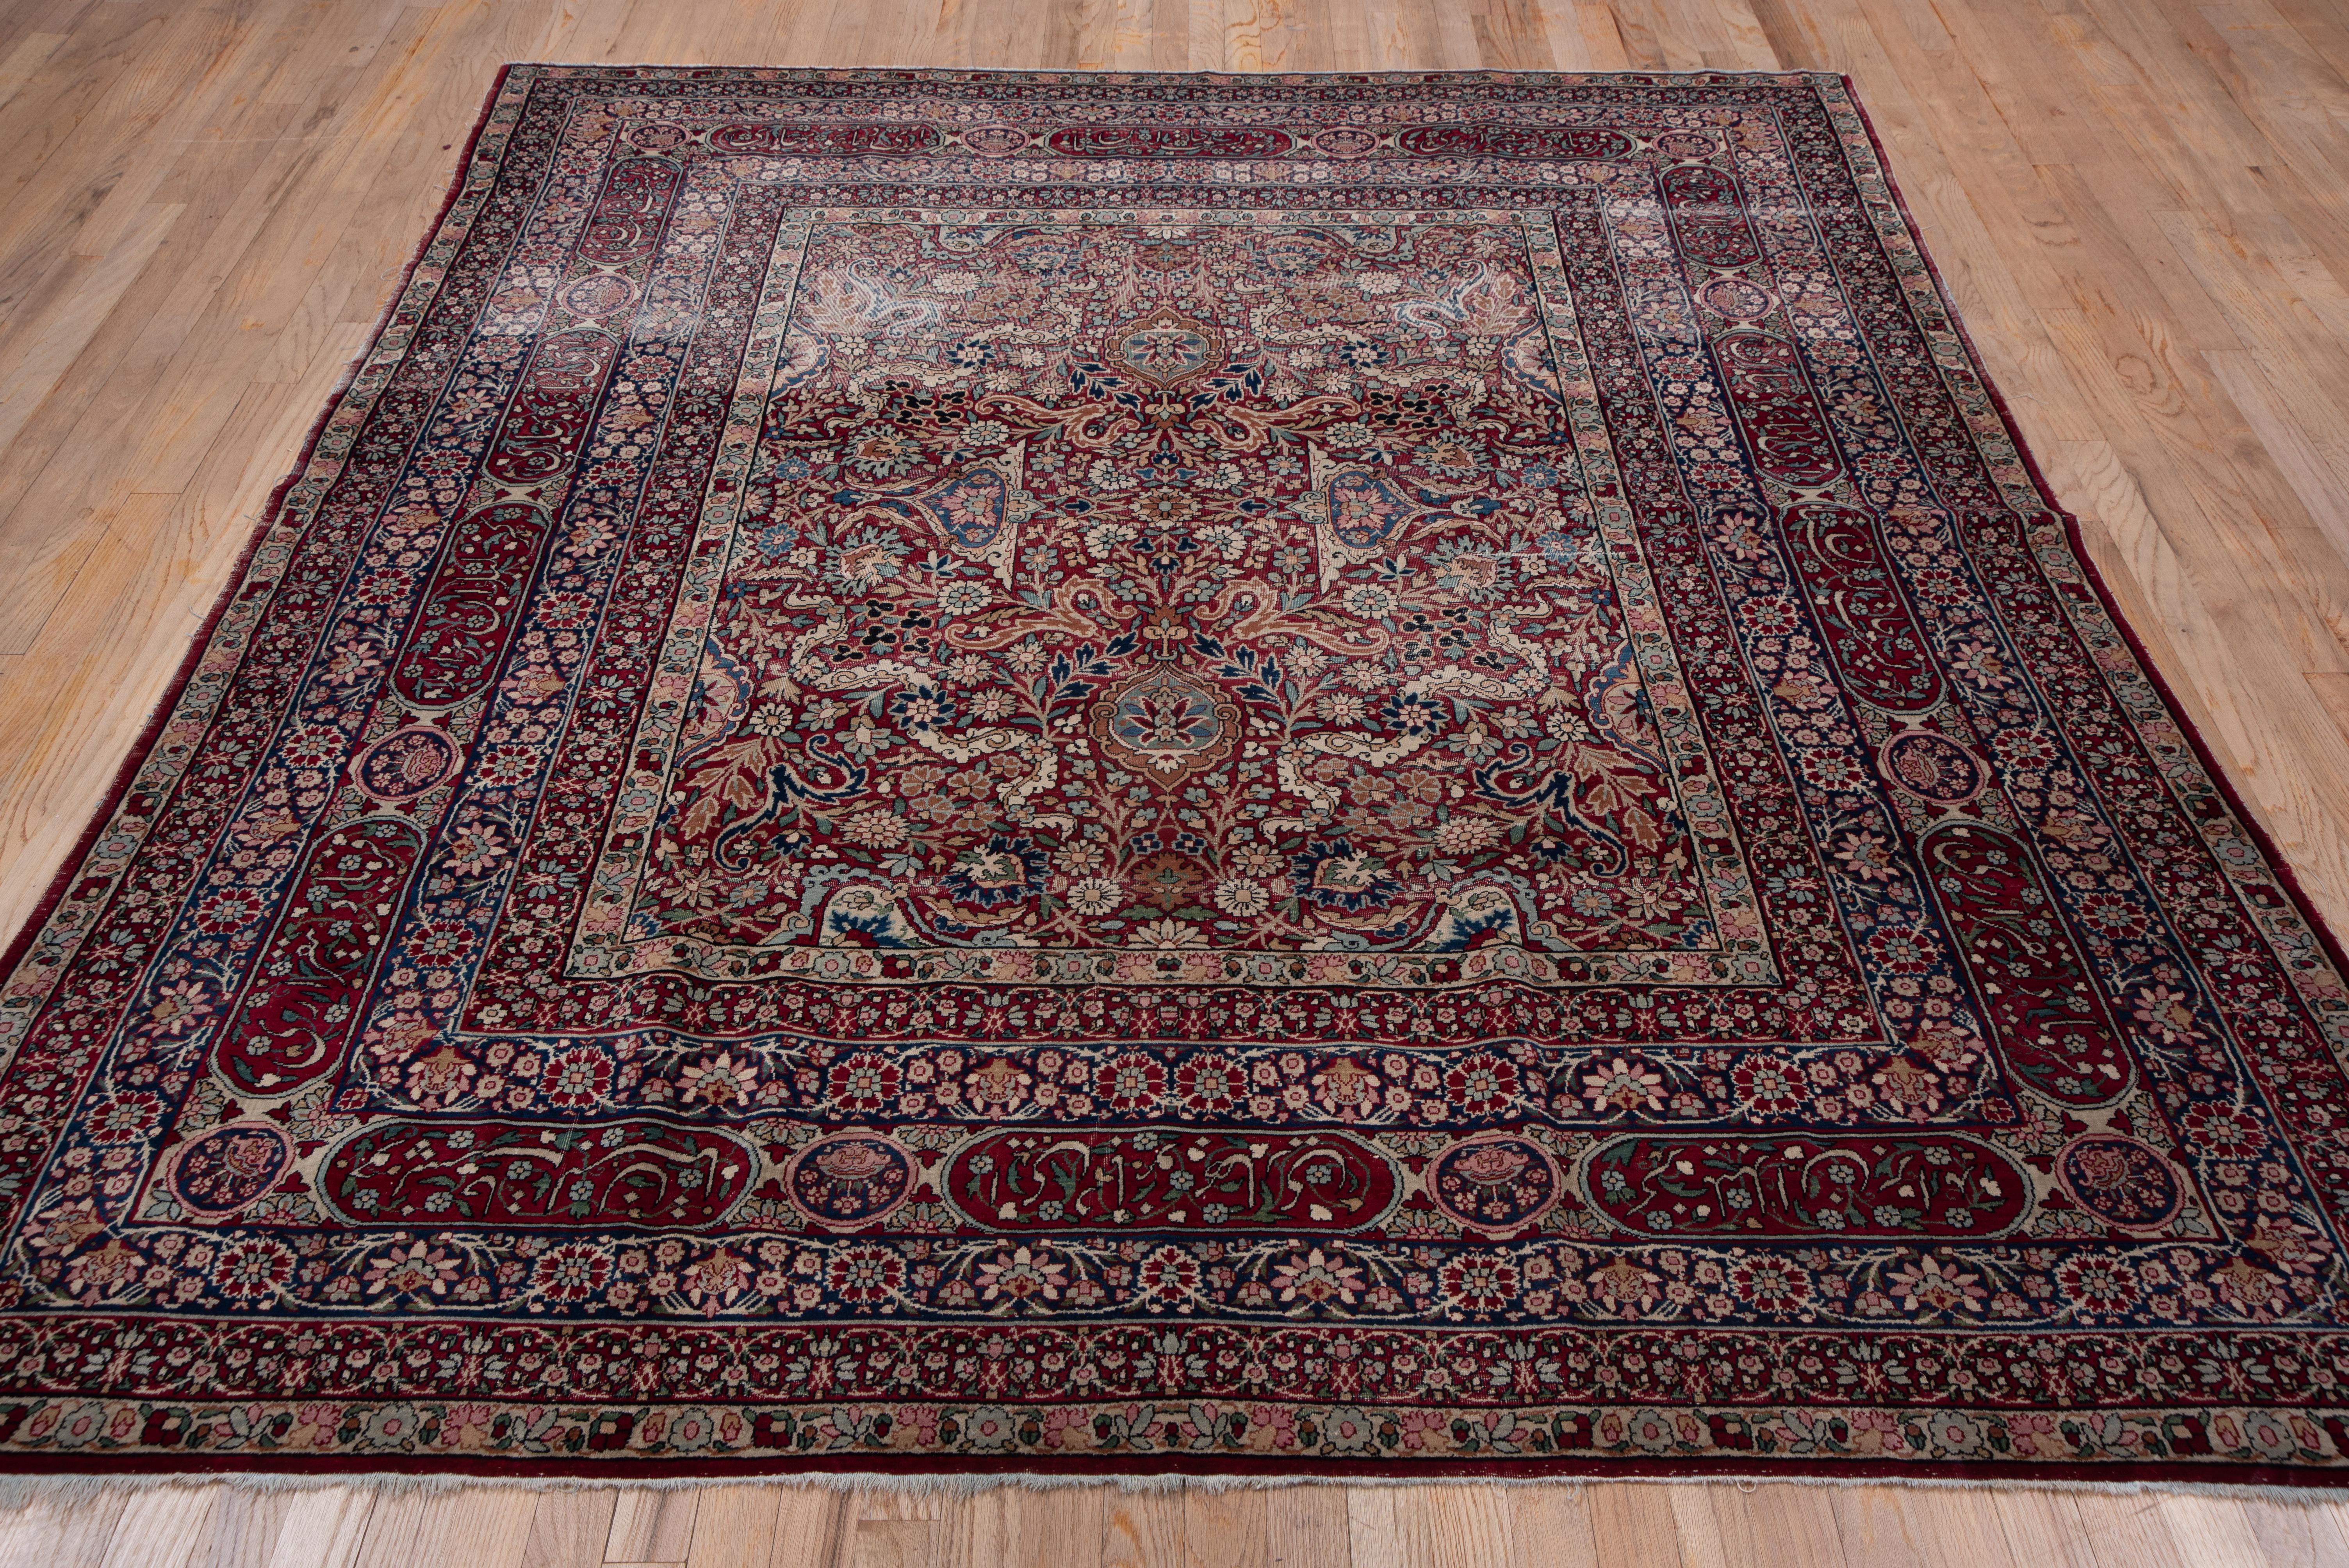 Finely woven, this Lavar quality large scatter from the famous SE Persian rug weaving center of Kerman, shows the characteristic cochineal scarlet field very closely covered by split arabesques, scalloped ovals, escutcheons and a wide variety of